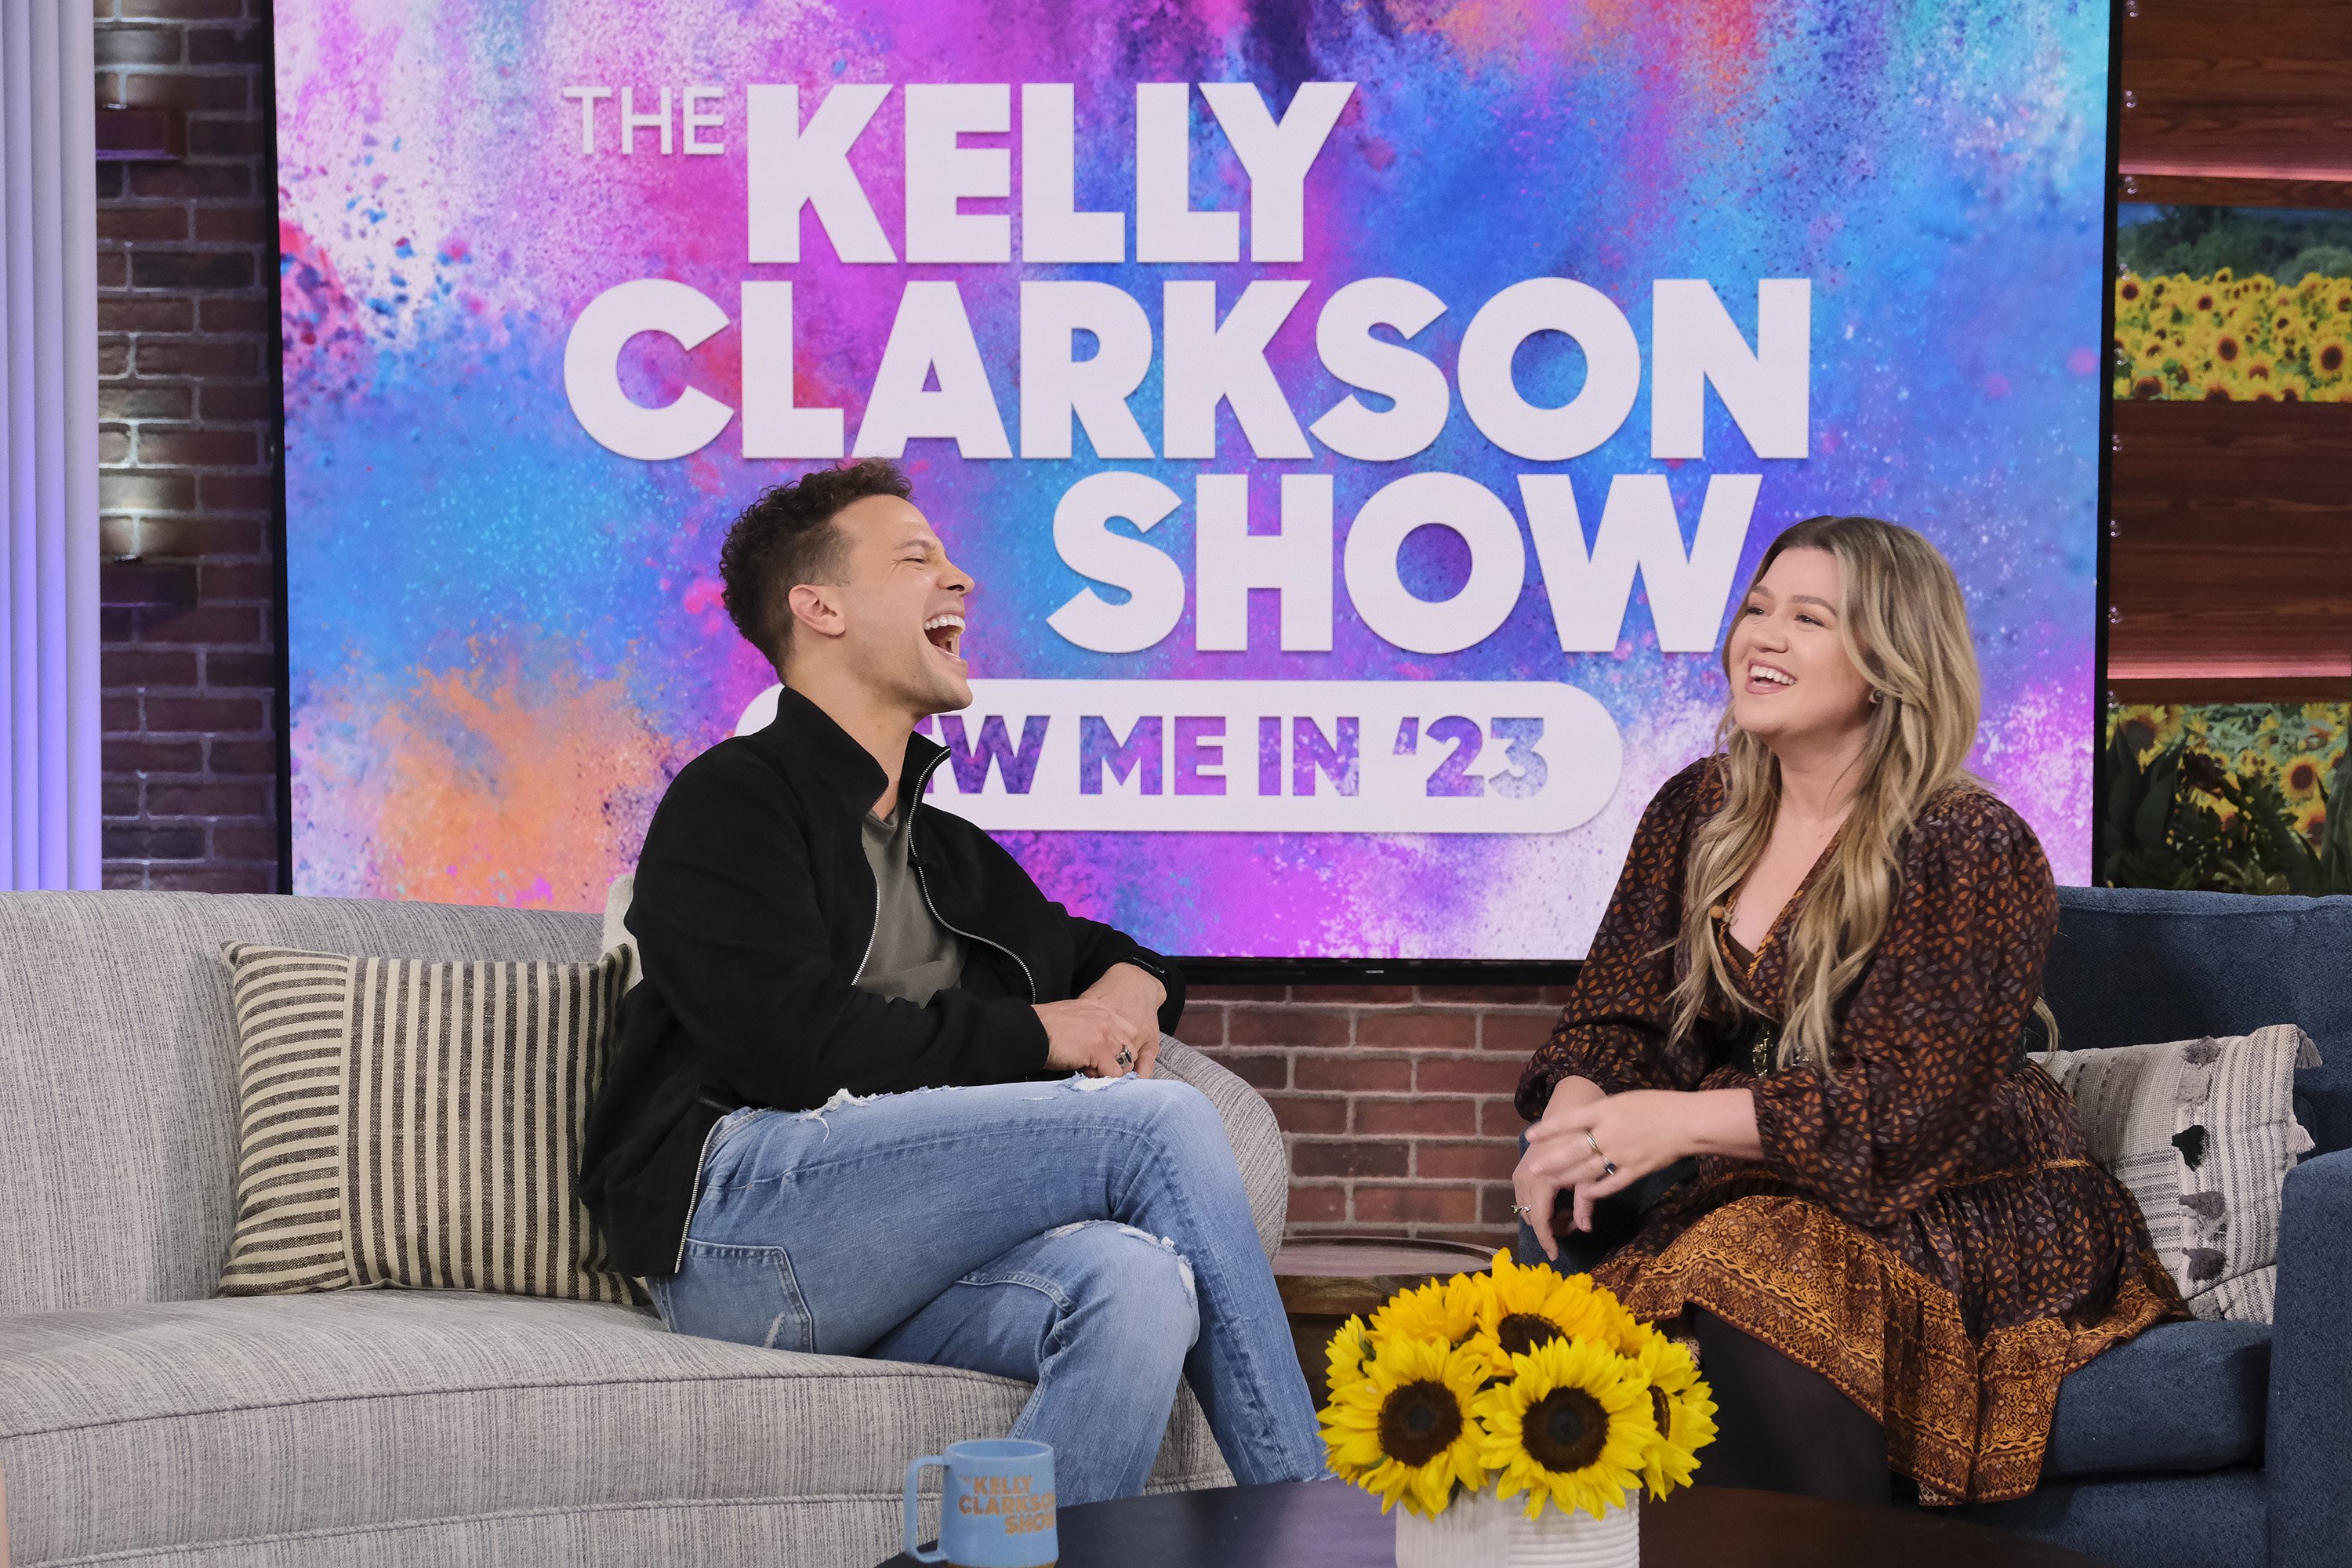 Justin Guarini and Kelly Clarkson on "The Kelly Clarkson Show" on December 9, 2022. | Source: Getty Images